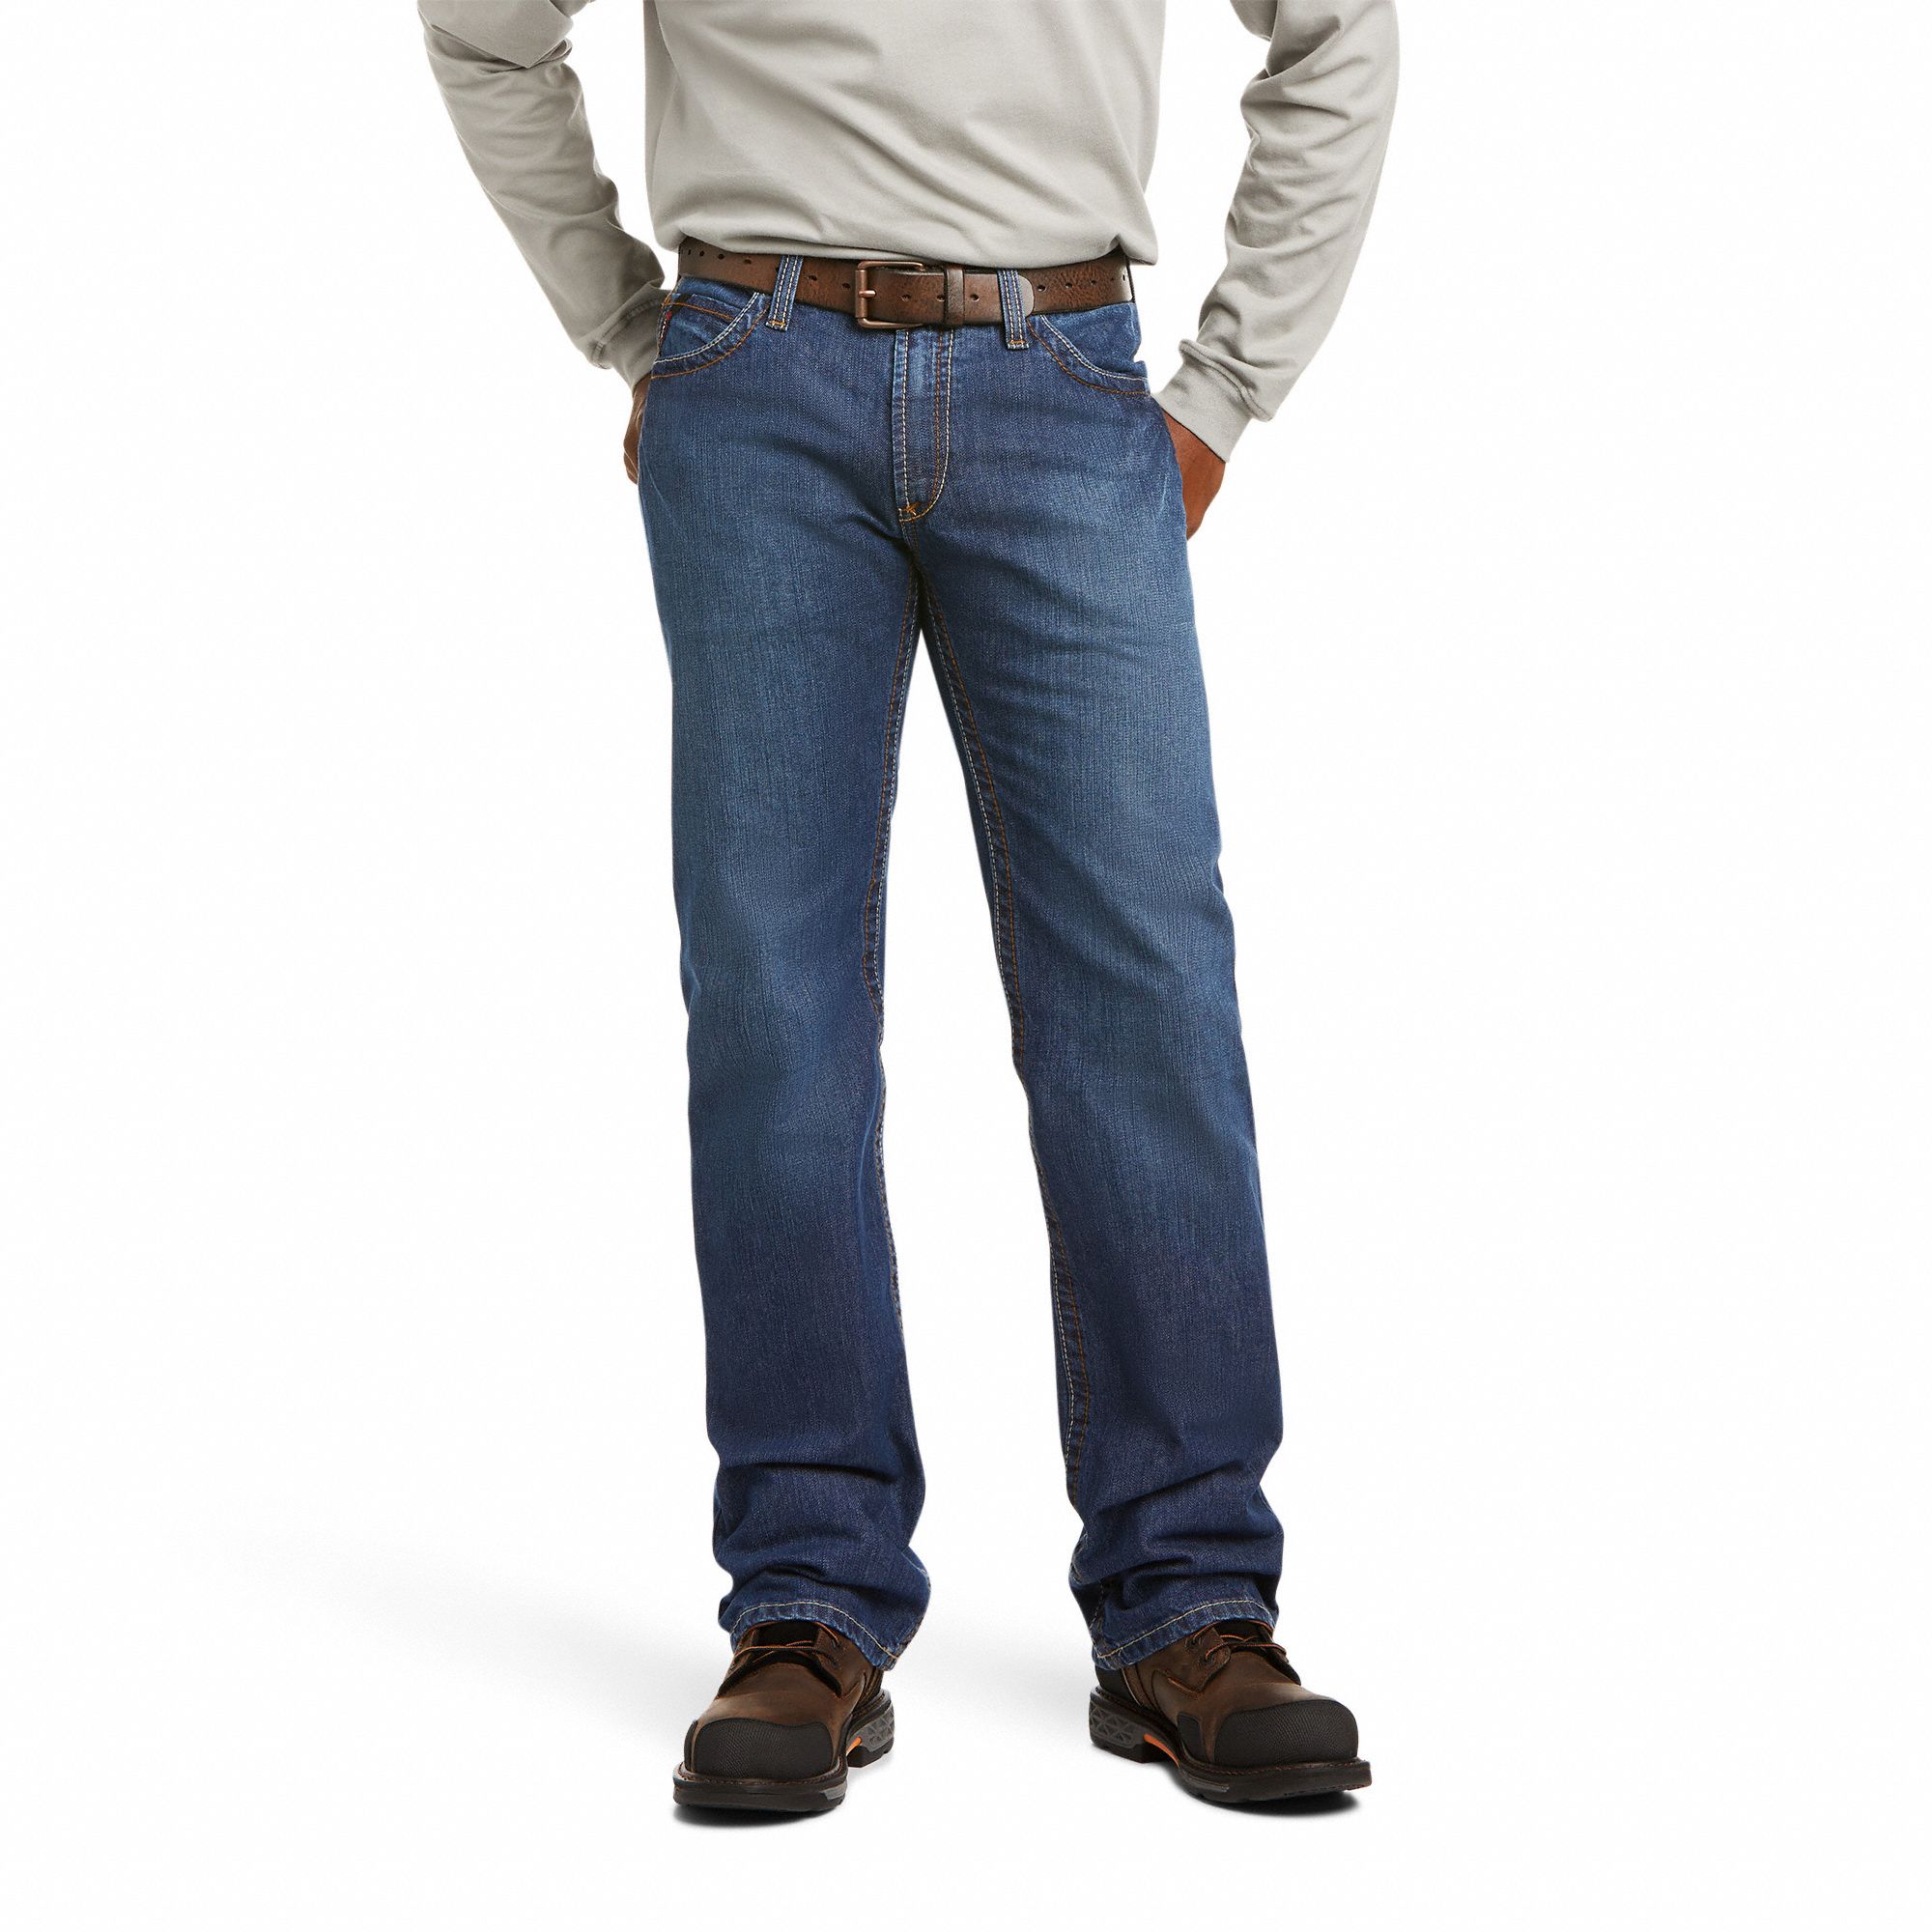 ARIAT, 20 cal/sq cm ATPV, Men's, Relaxed Fit FR Jeans - 61RP80|10012552 ...